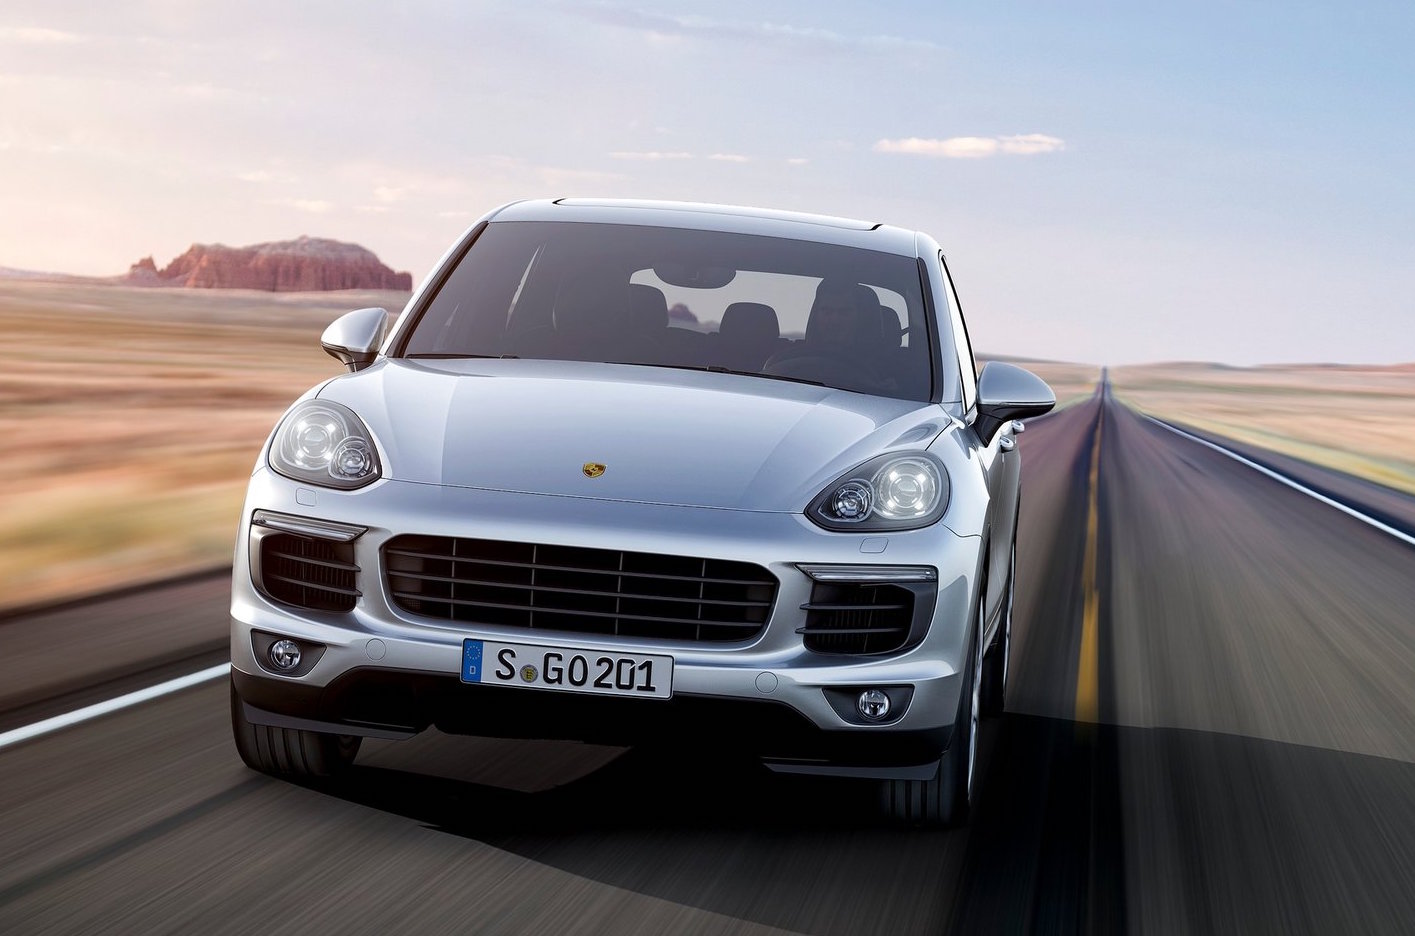 Porsche Australia to roll out recall for 3.0 TDI, following emissions scandal